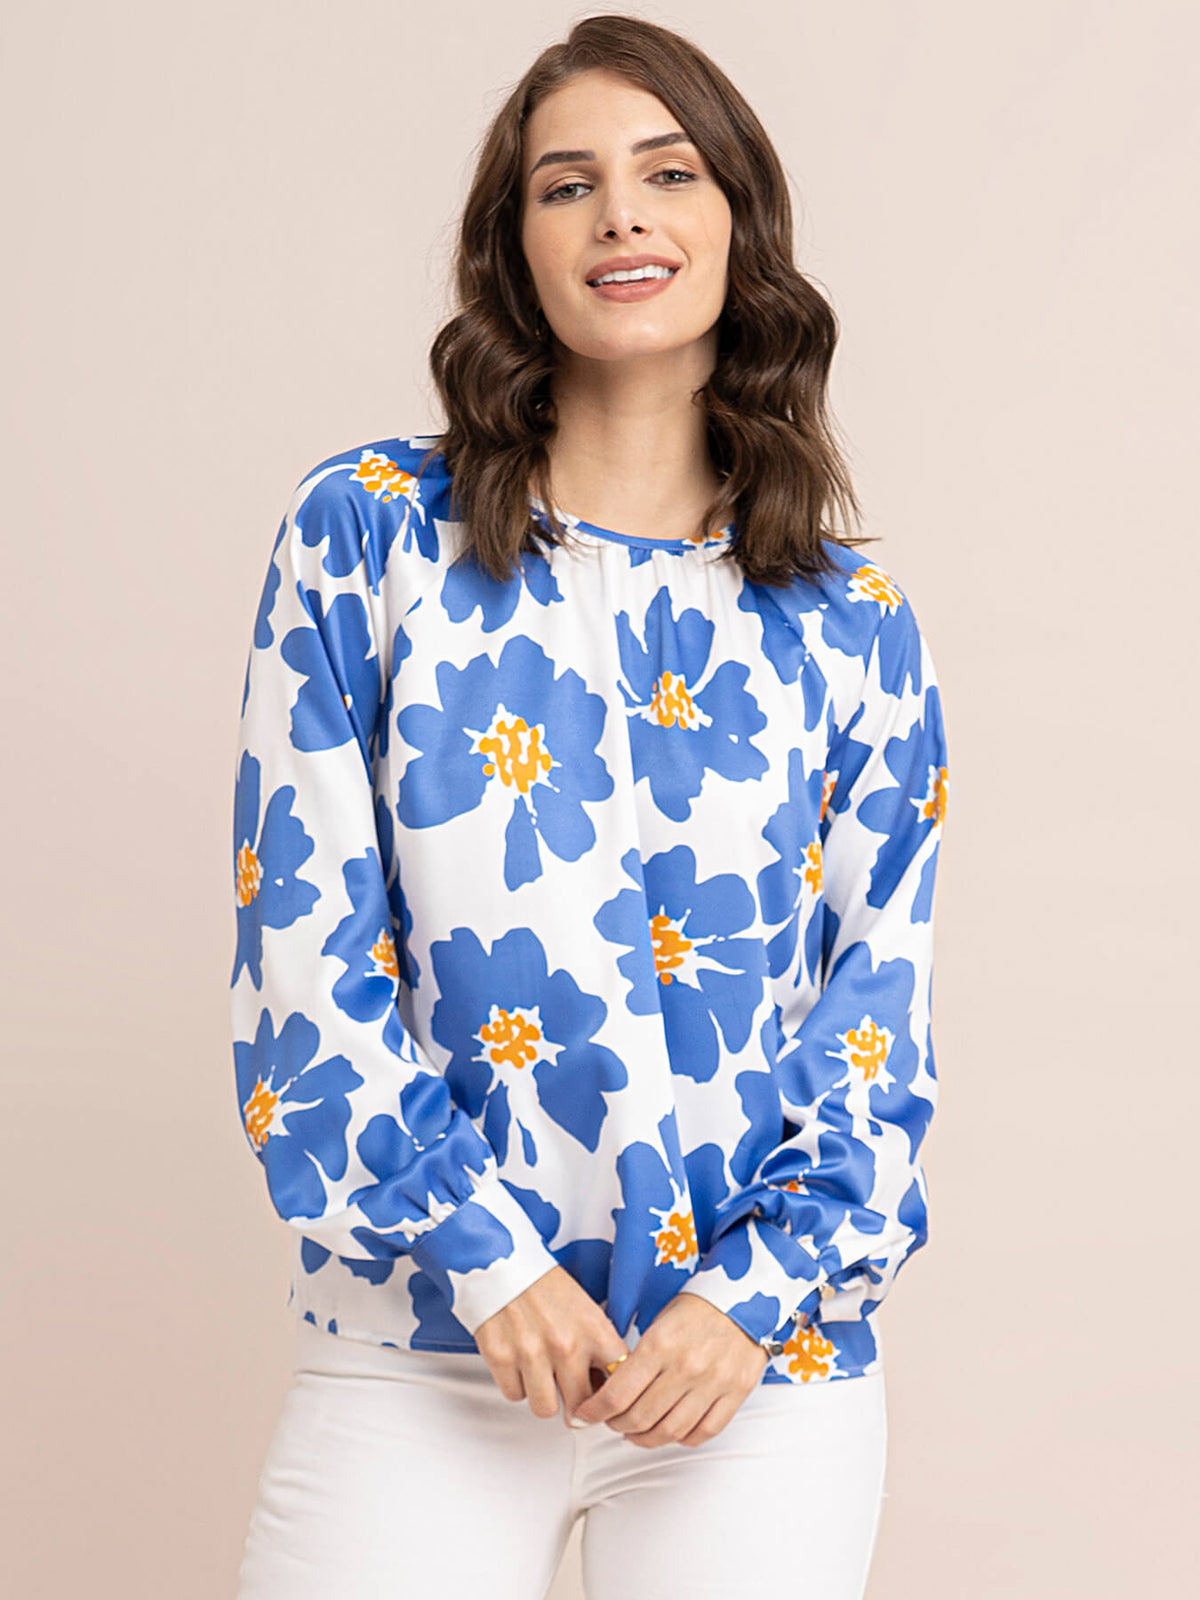 Floral Top - Blue And White